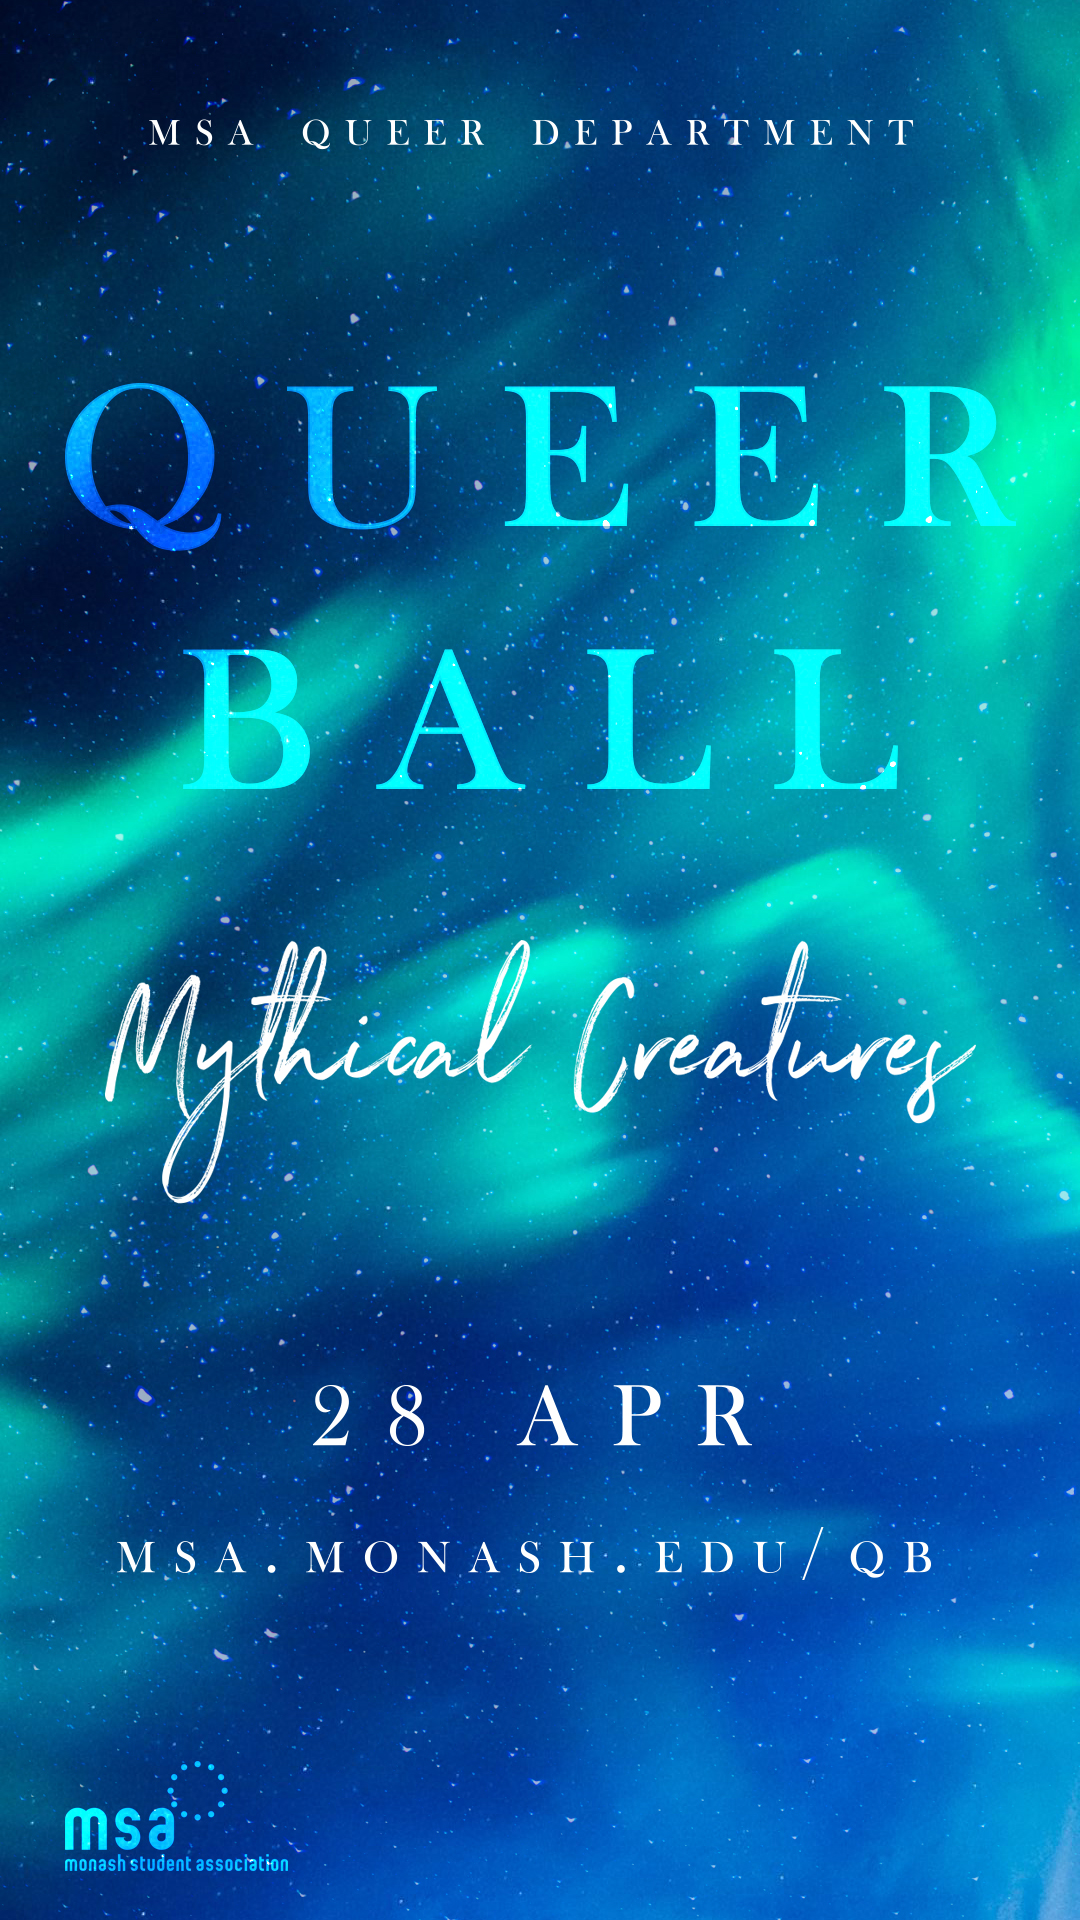 Queer Ball: Mythical Creatures